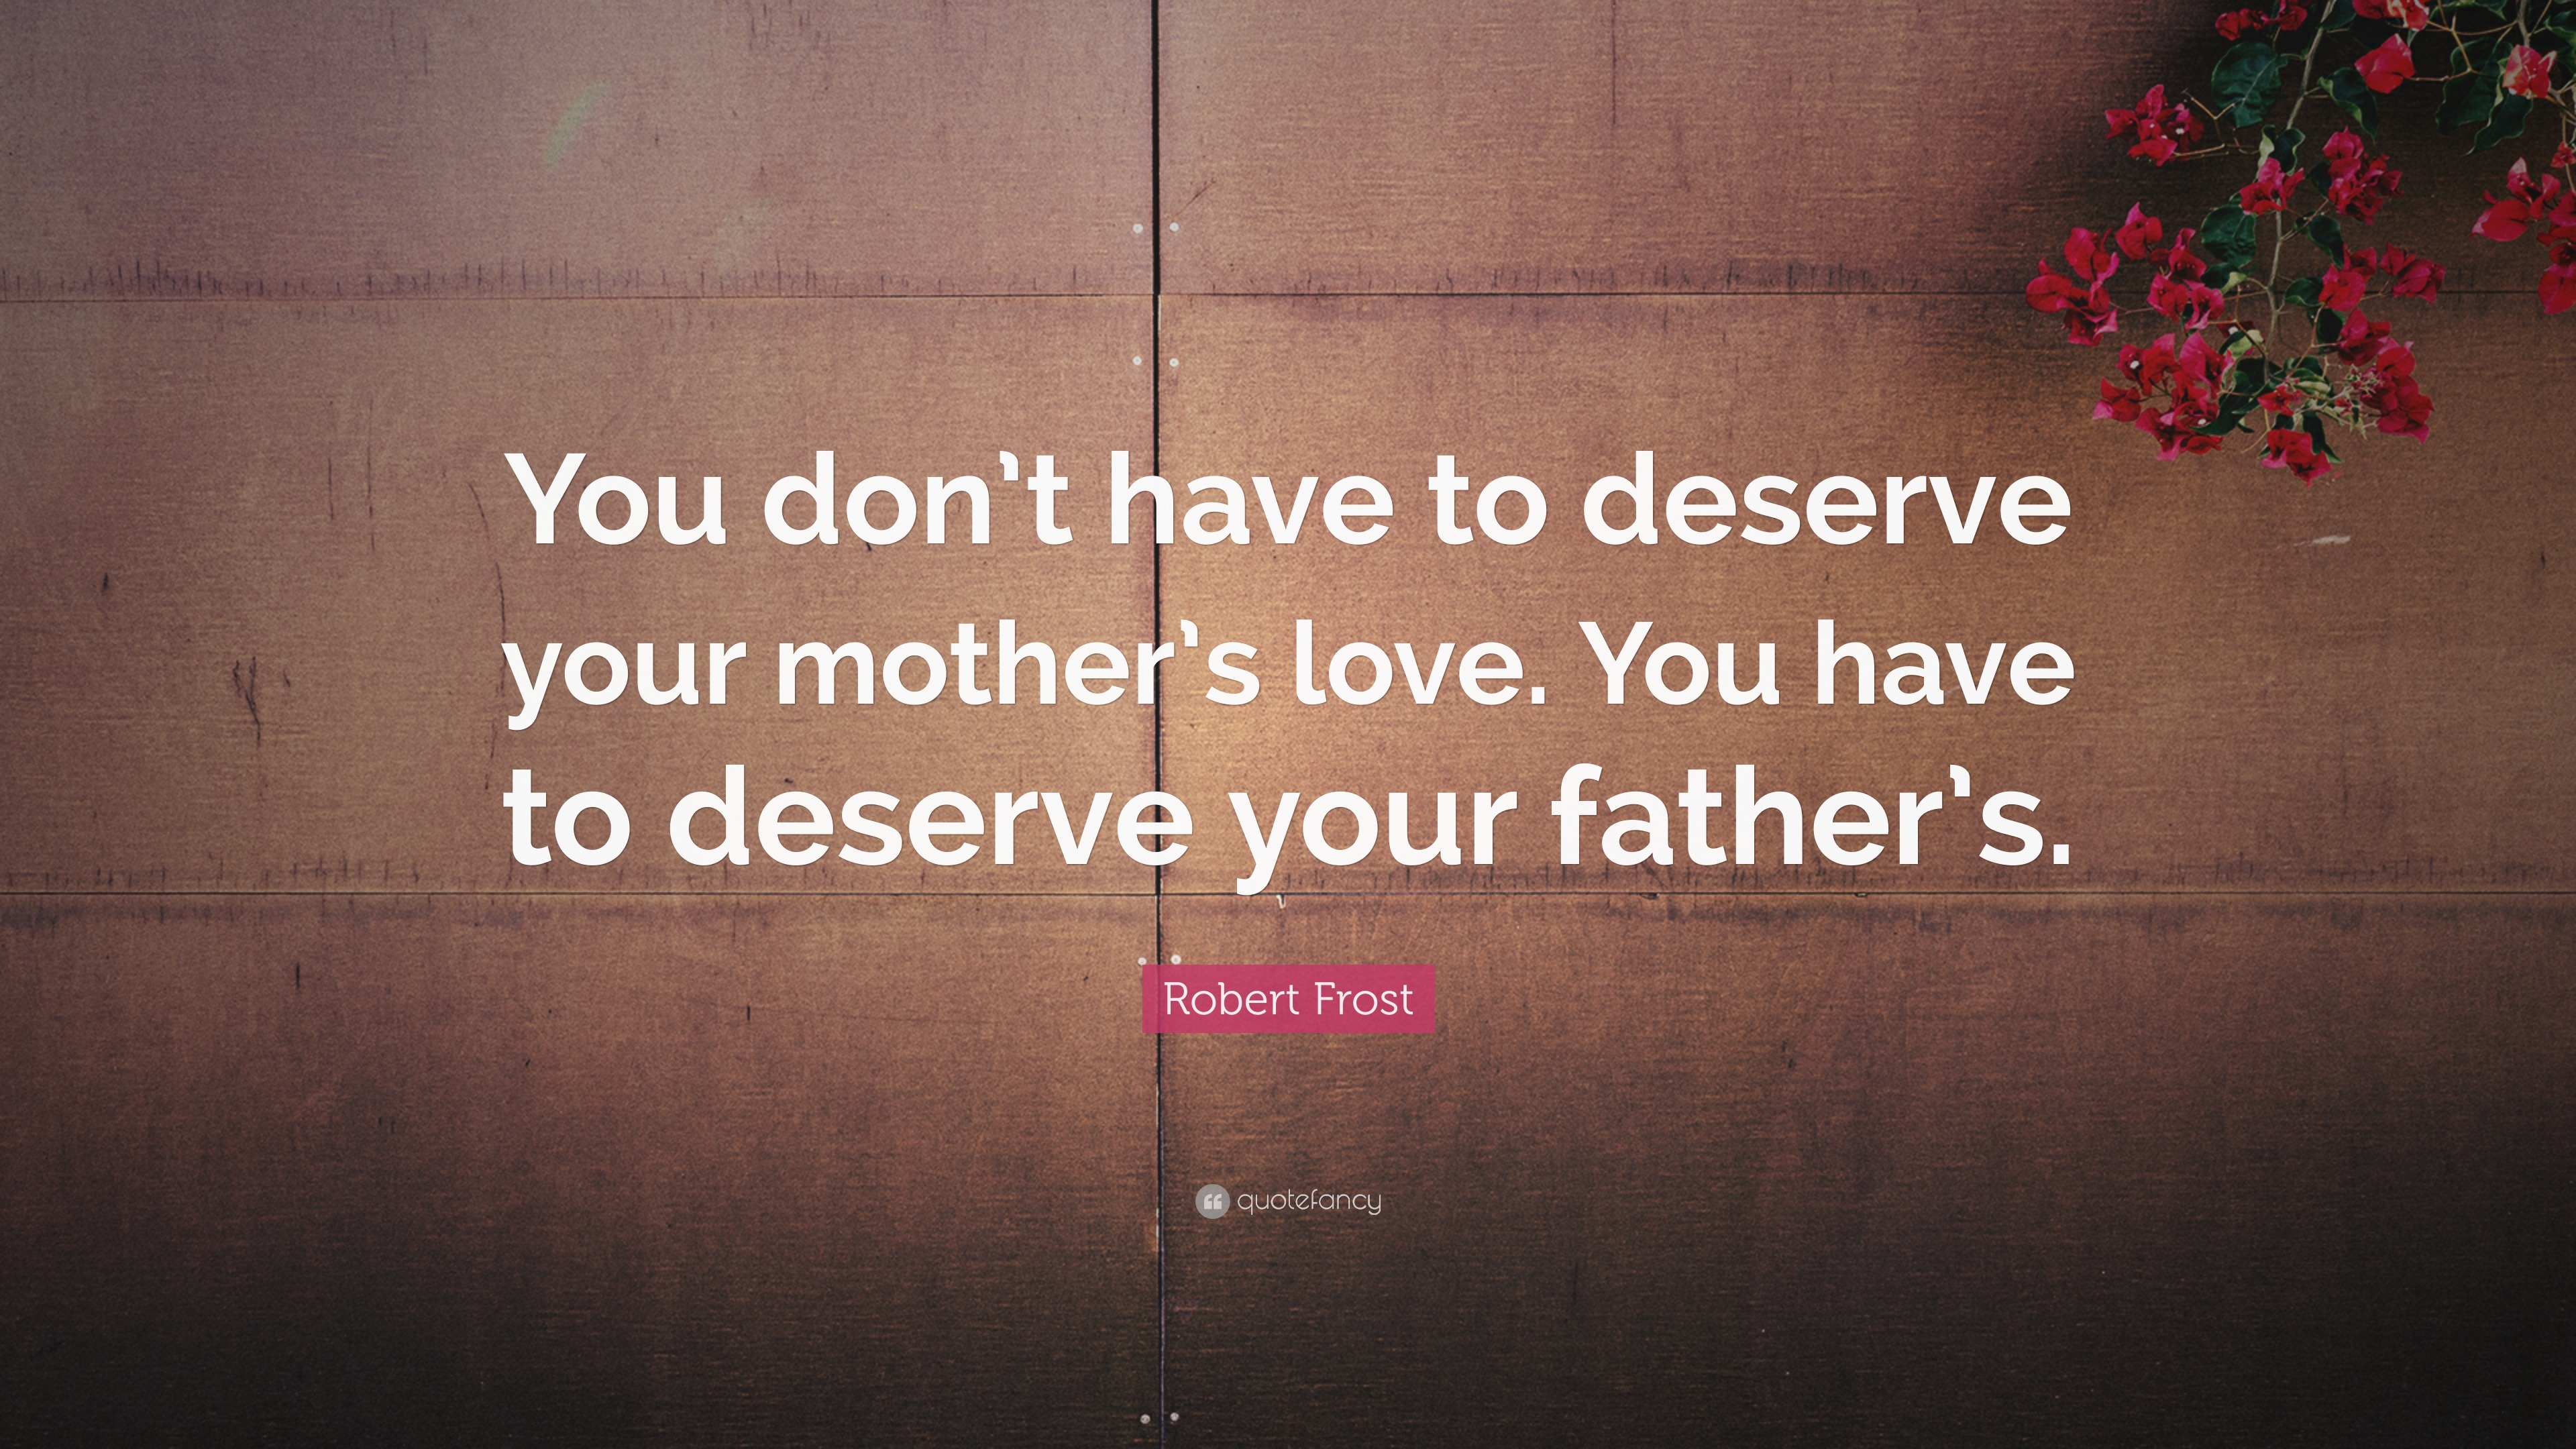 Robert Frost Quote “You don t have to deserve your mother s love